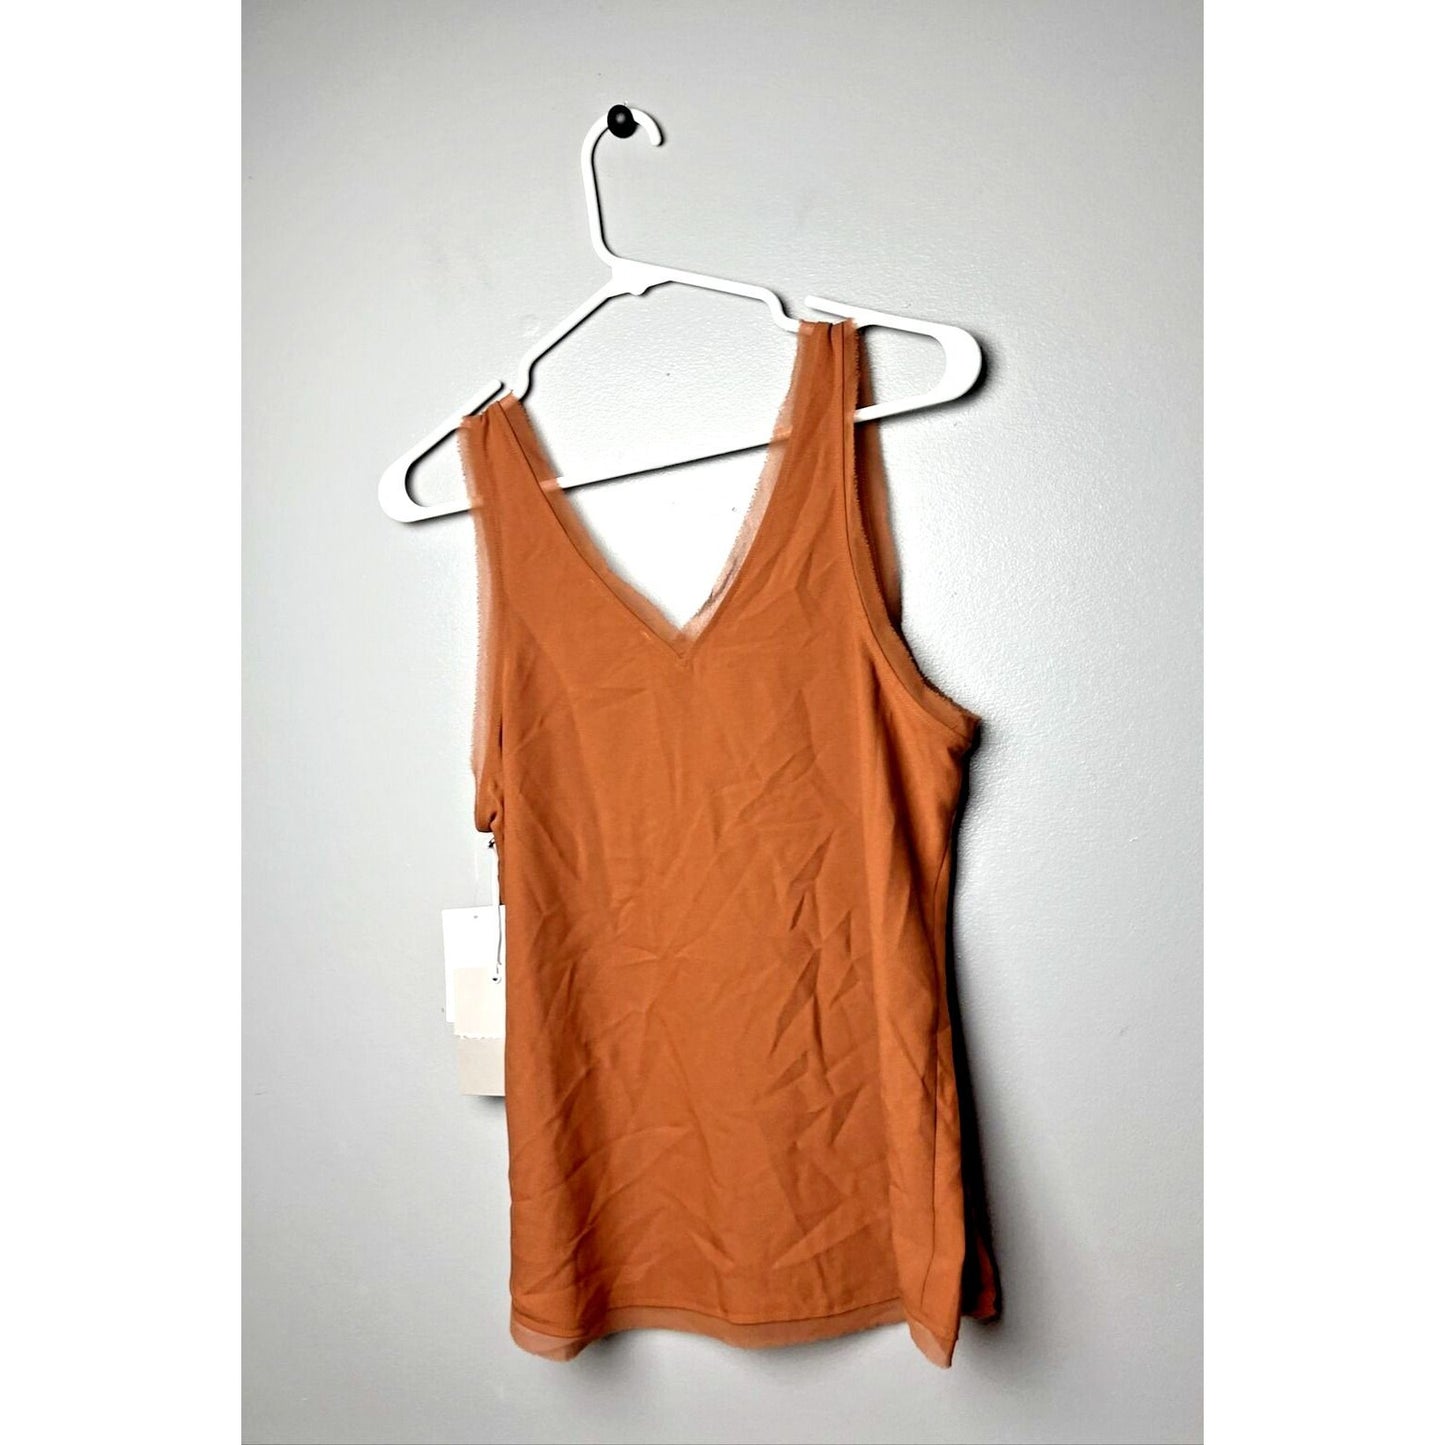 Chelsea 28 Raw Edge Rust Brown V Neck Top Size Small New With Tags!